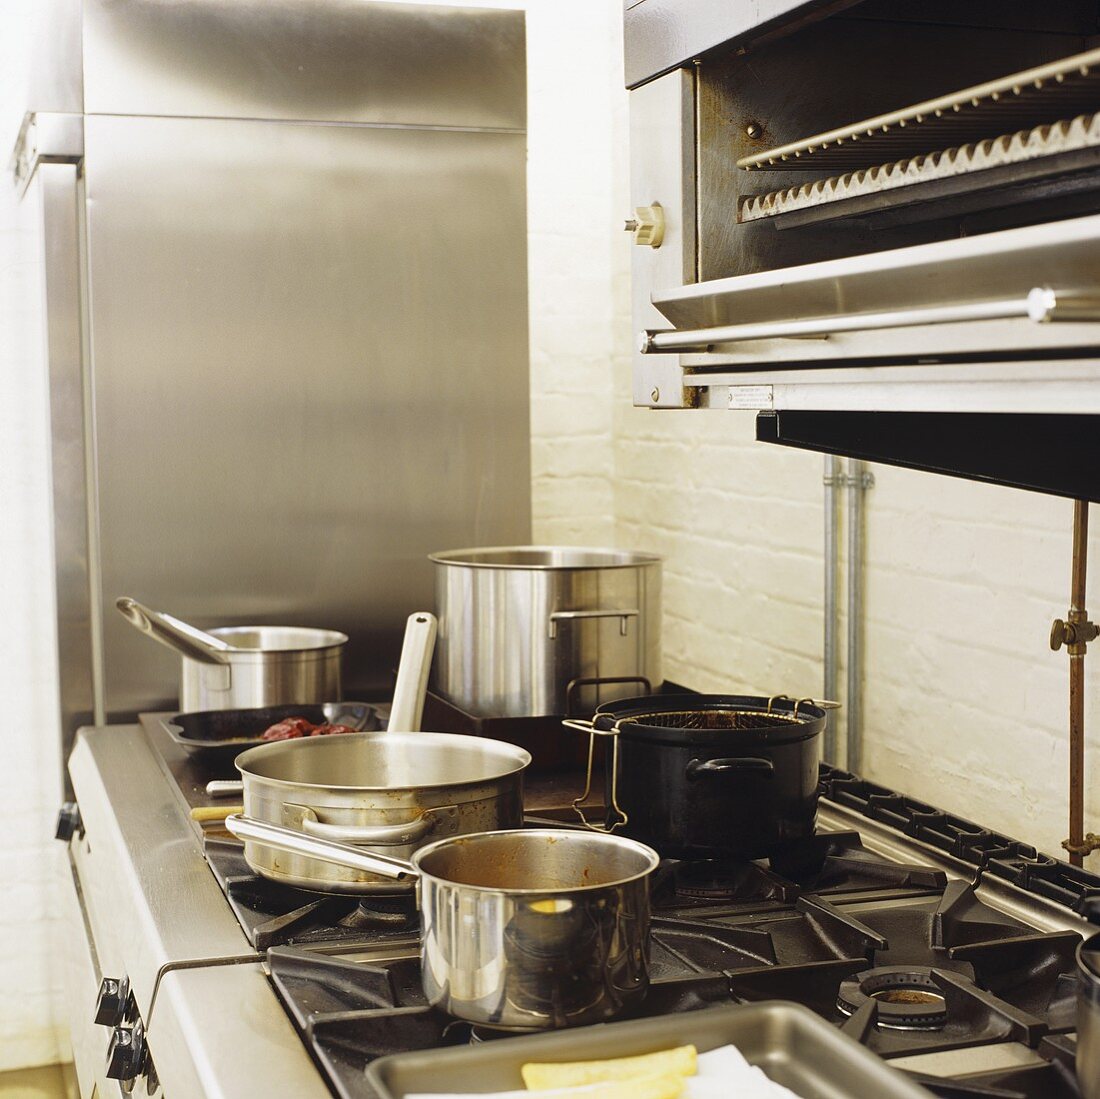 Assorted pans on a gas cooker